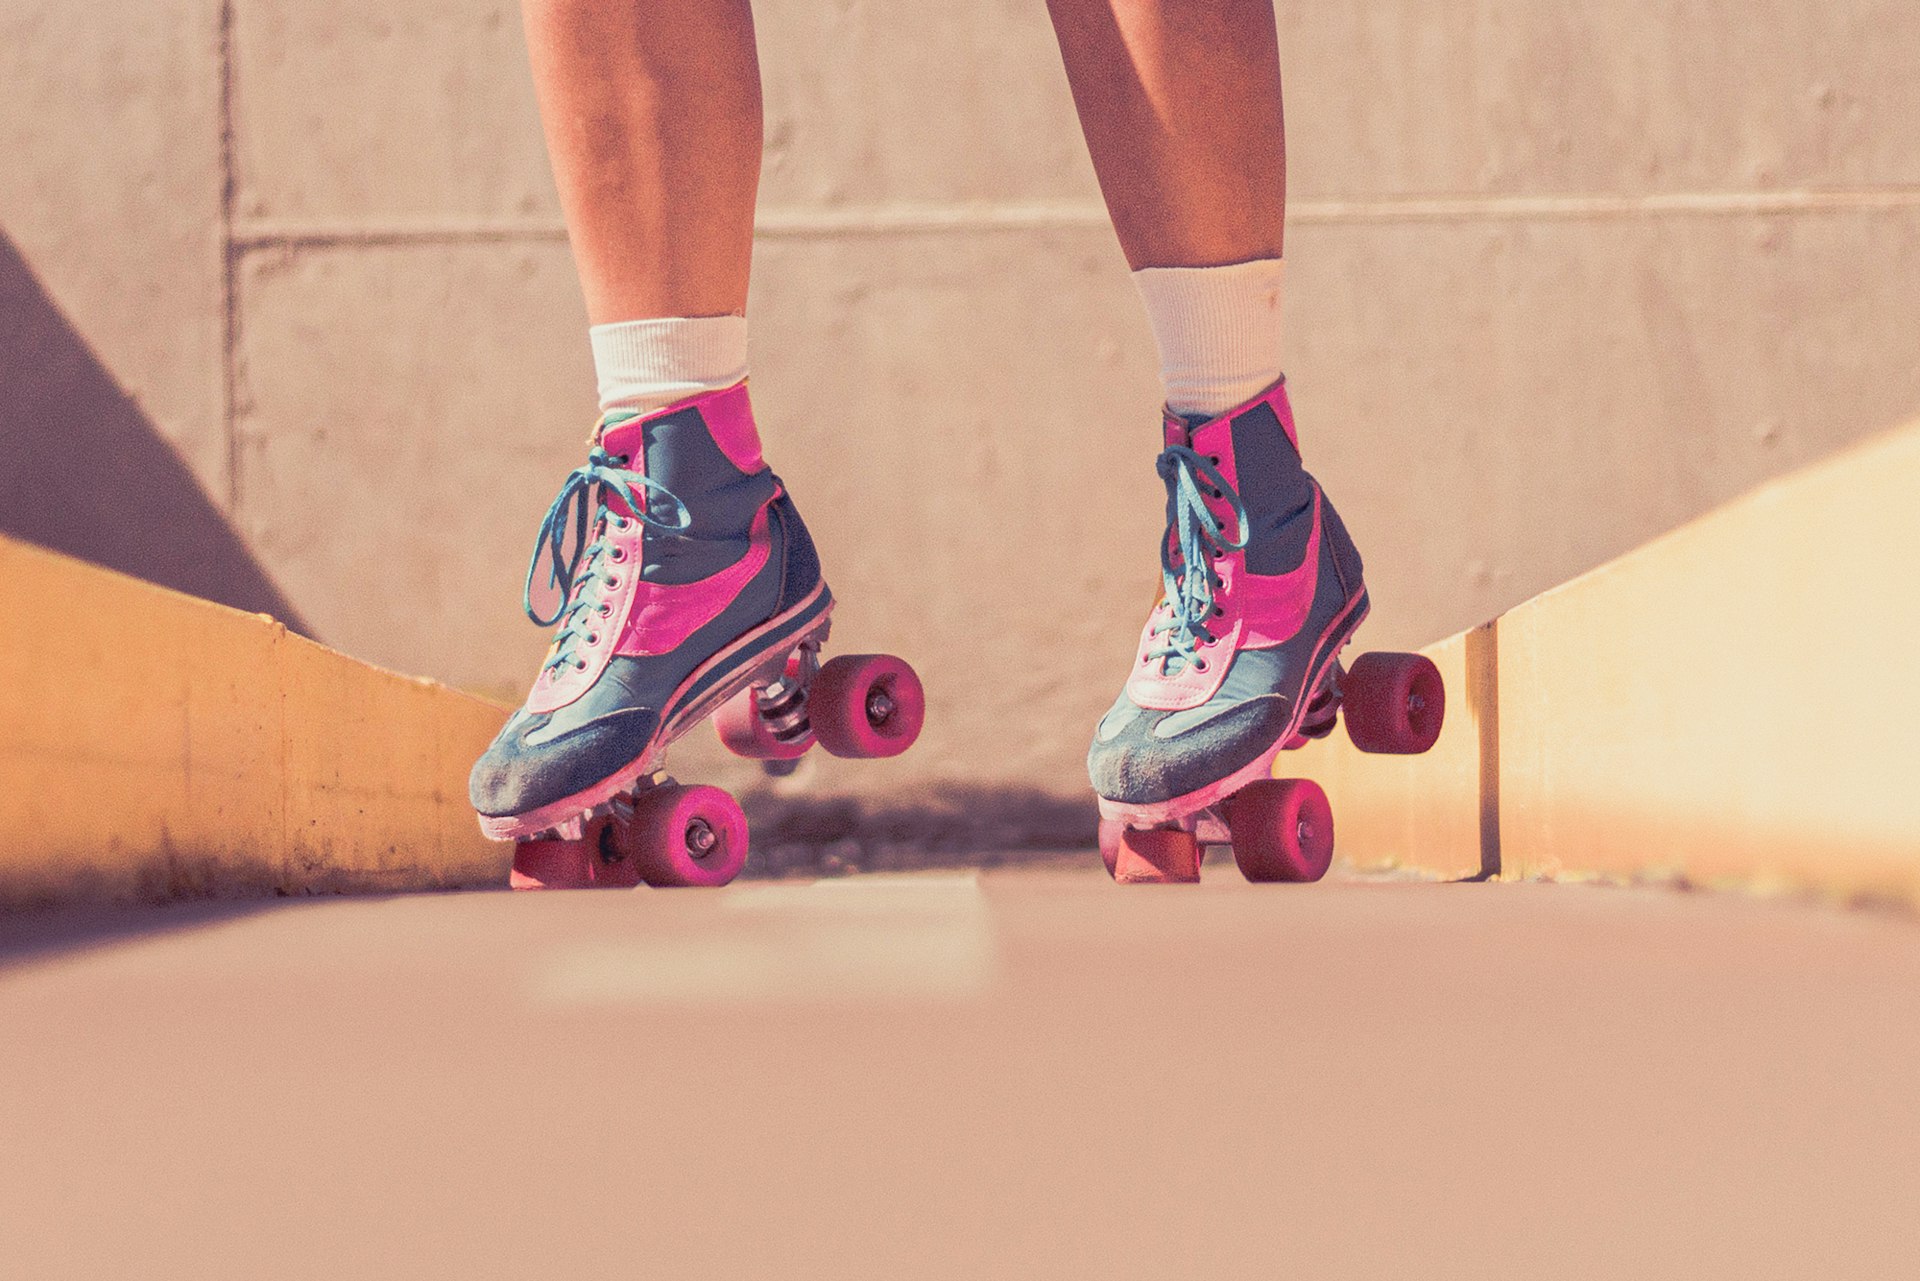 A person on roller skates, tilted on their toes.